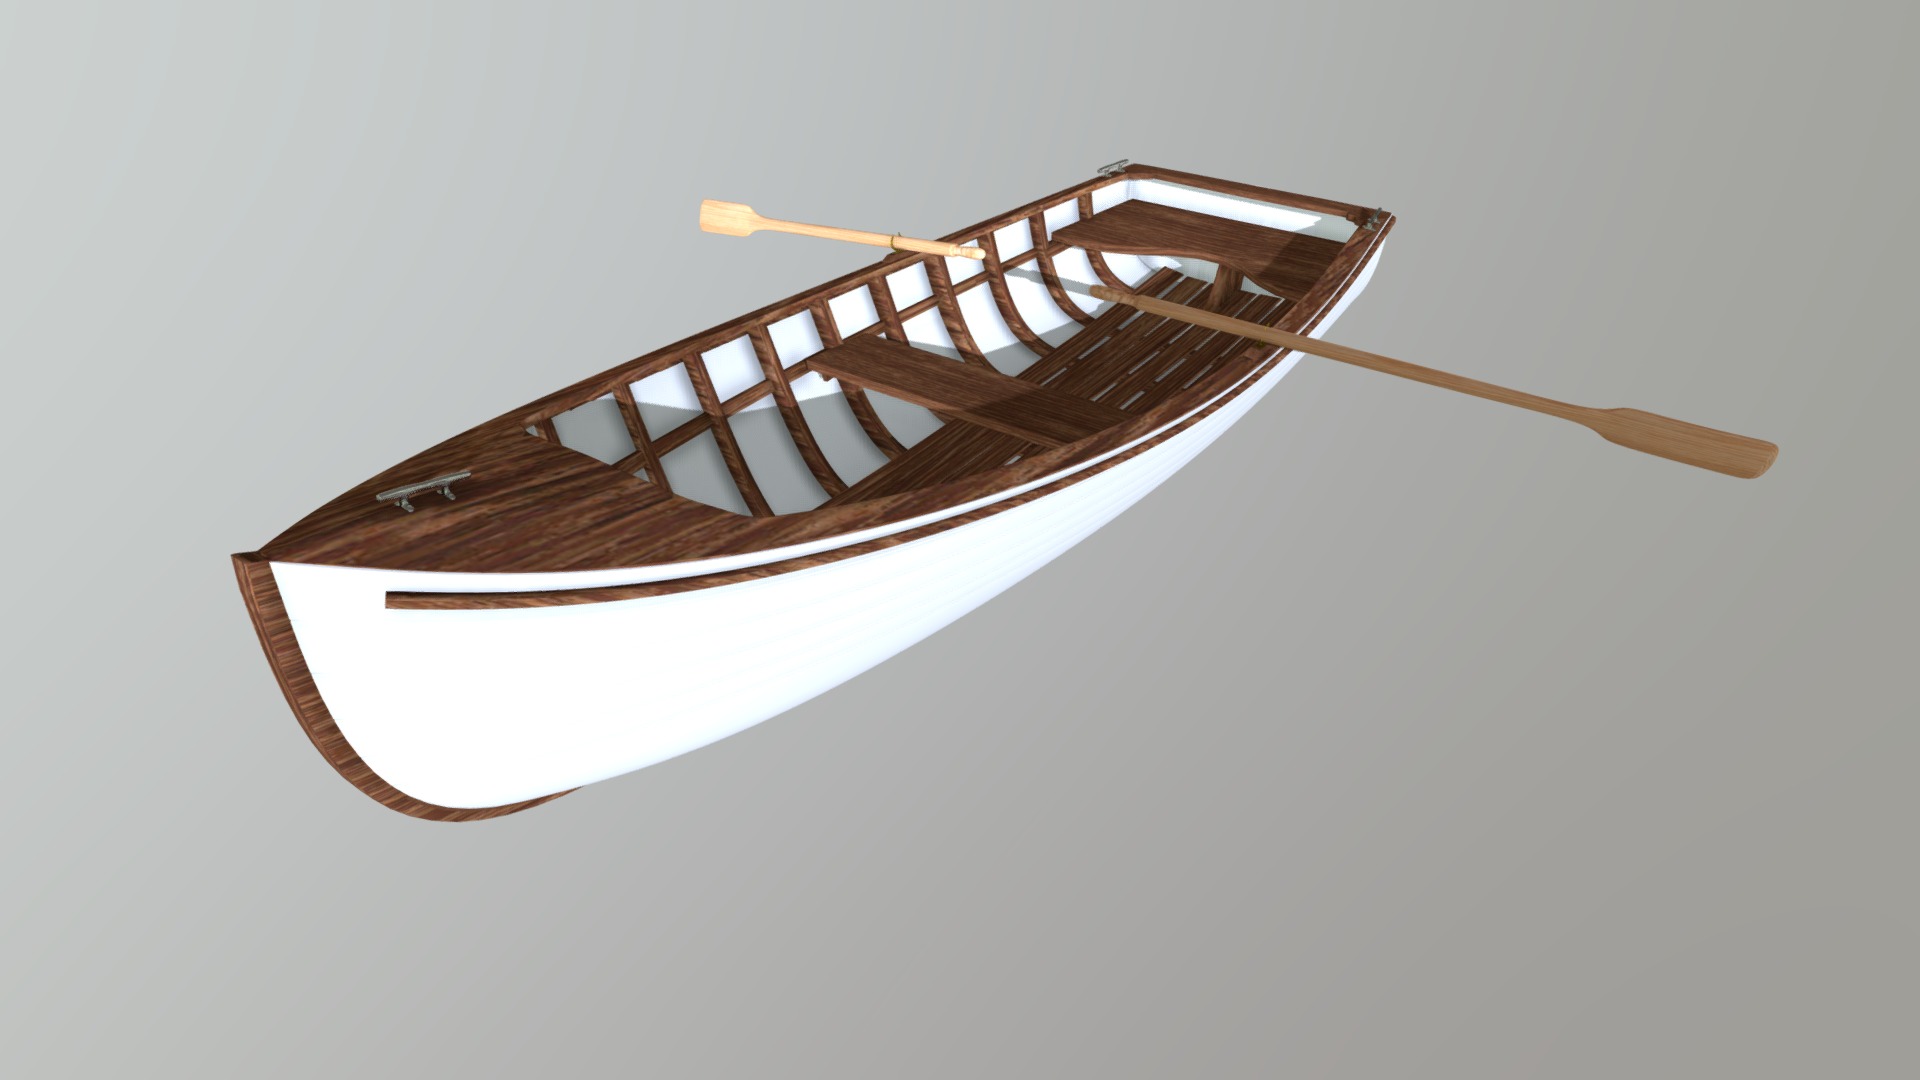 3D model Rowboat - This is a 3D model of the Rowboat. The 3D model is about a wooden paddle on a white background.